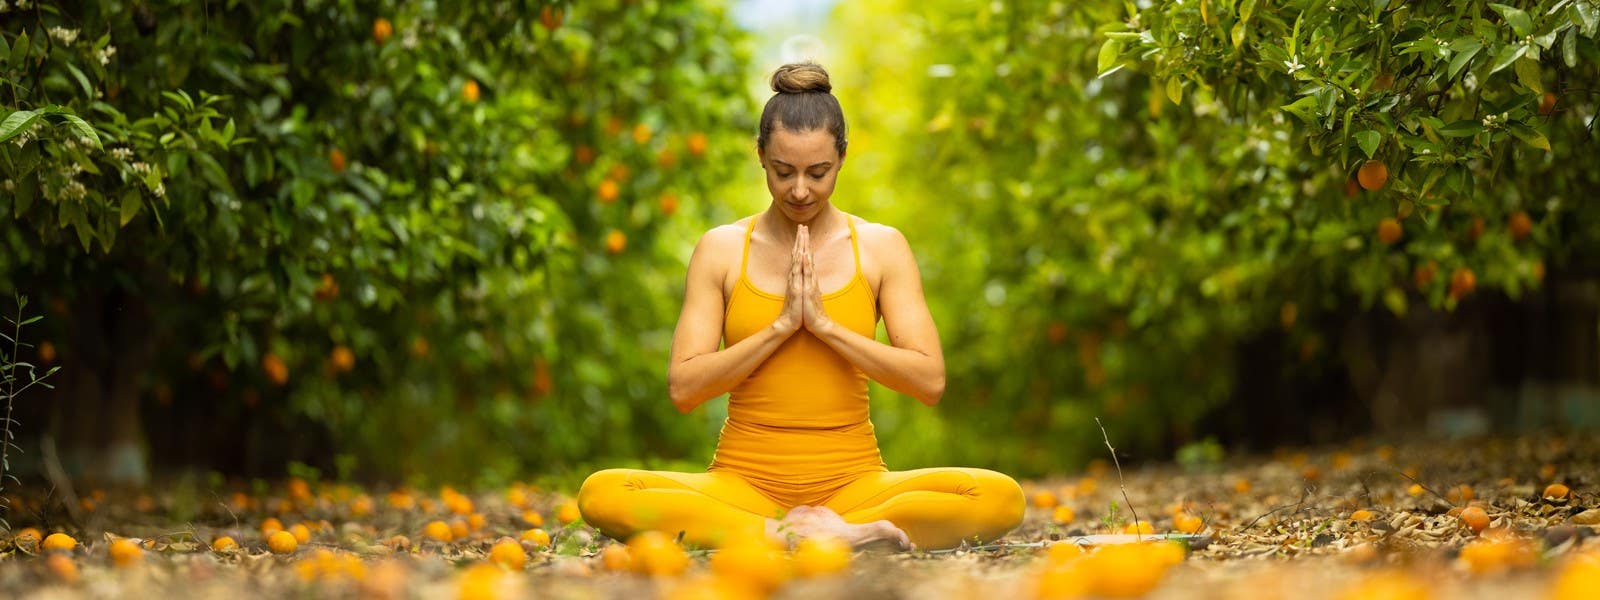 Yoga Lifestyle 101: Everything You Need To Know To Live a Yogic